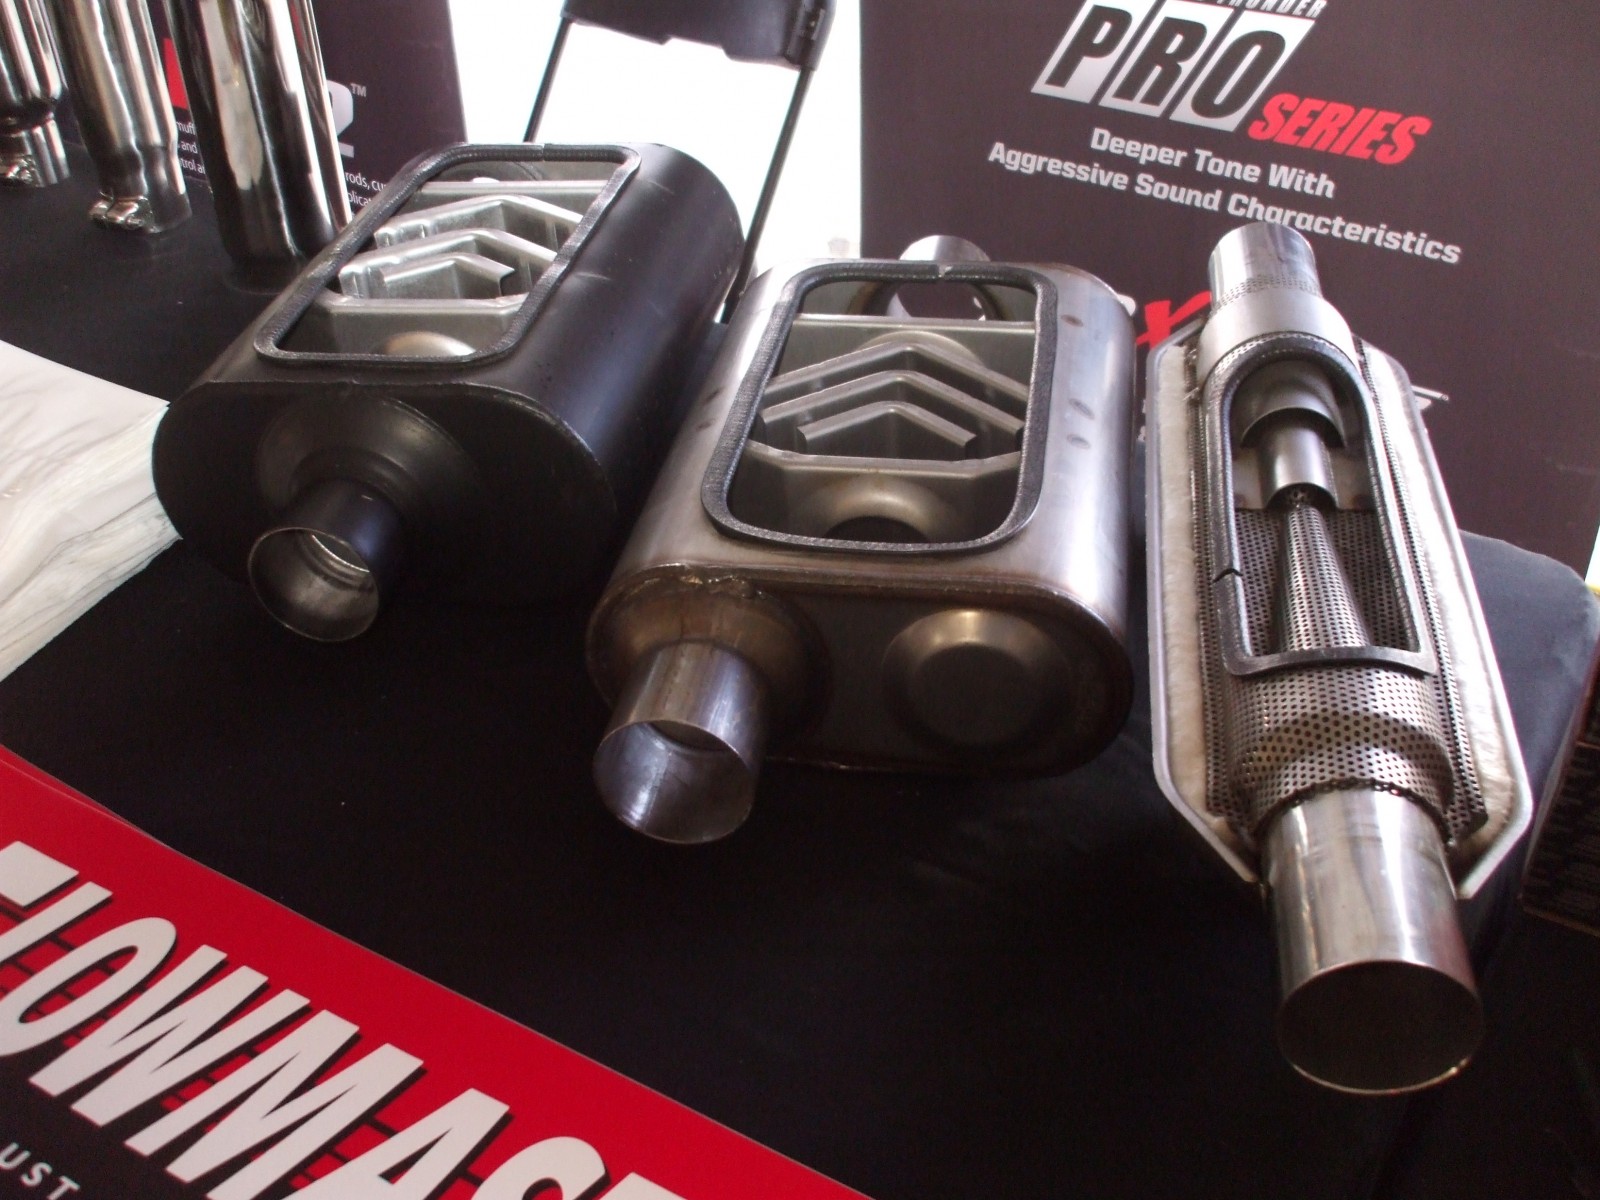 Flowmaster brought an assortment of exhaust products for the truck market, ...